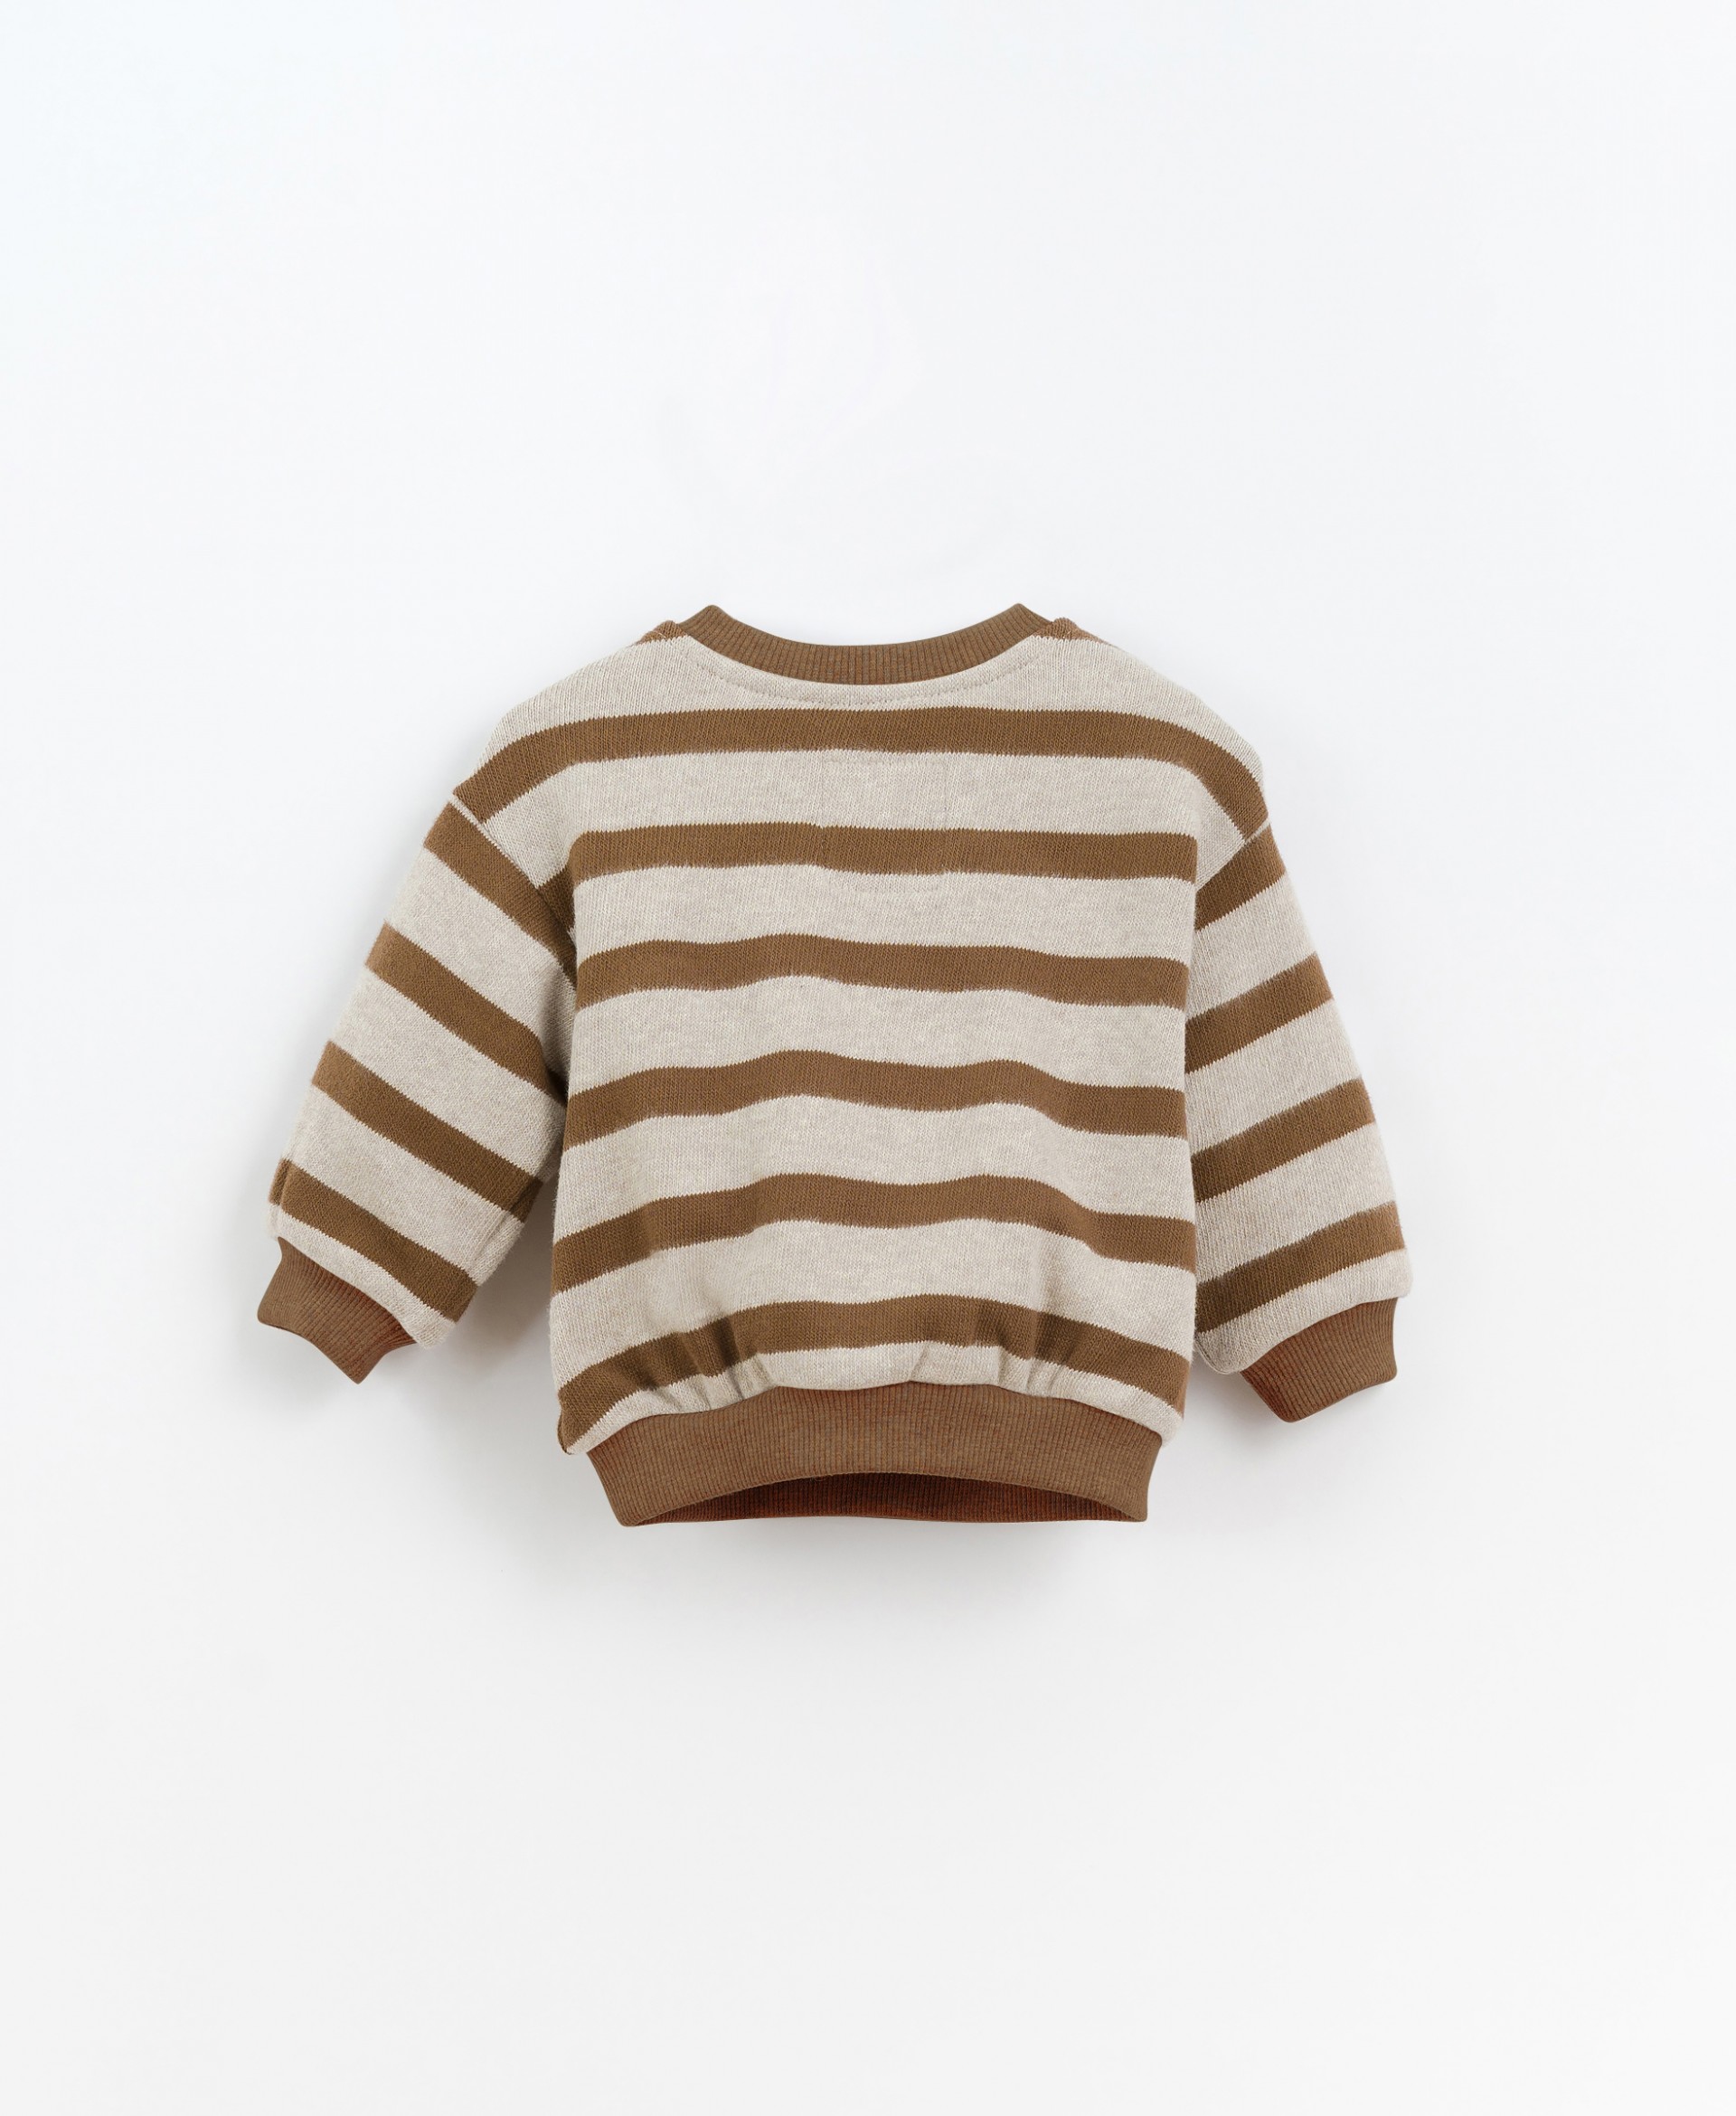 Striped jersey with fleece on the inside | Culinary